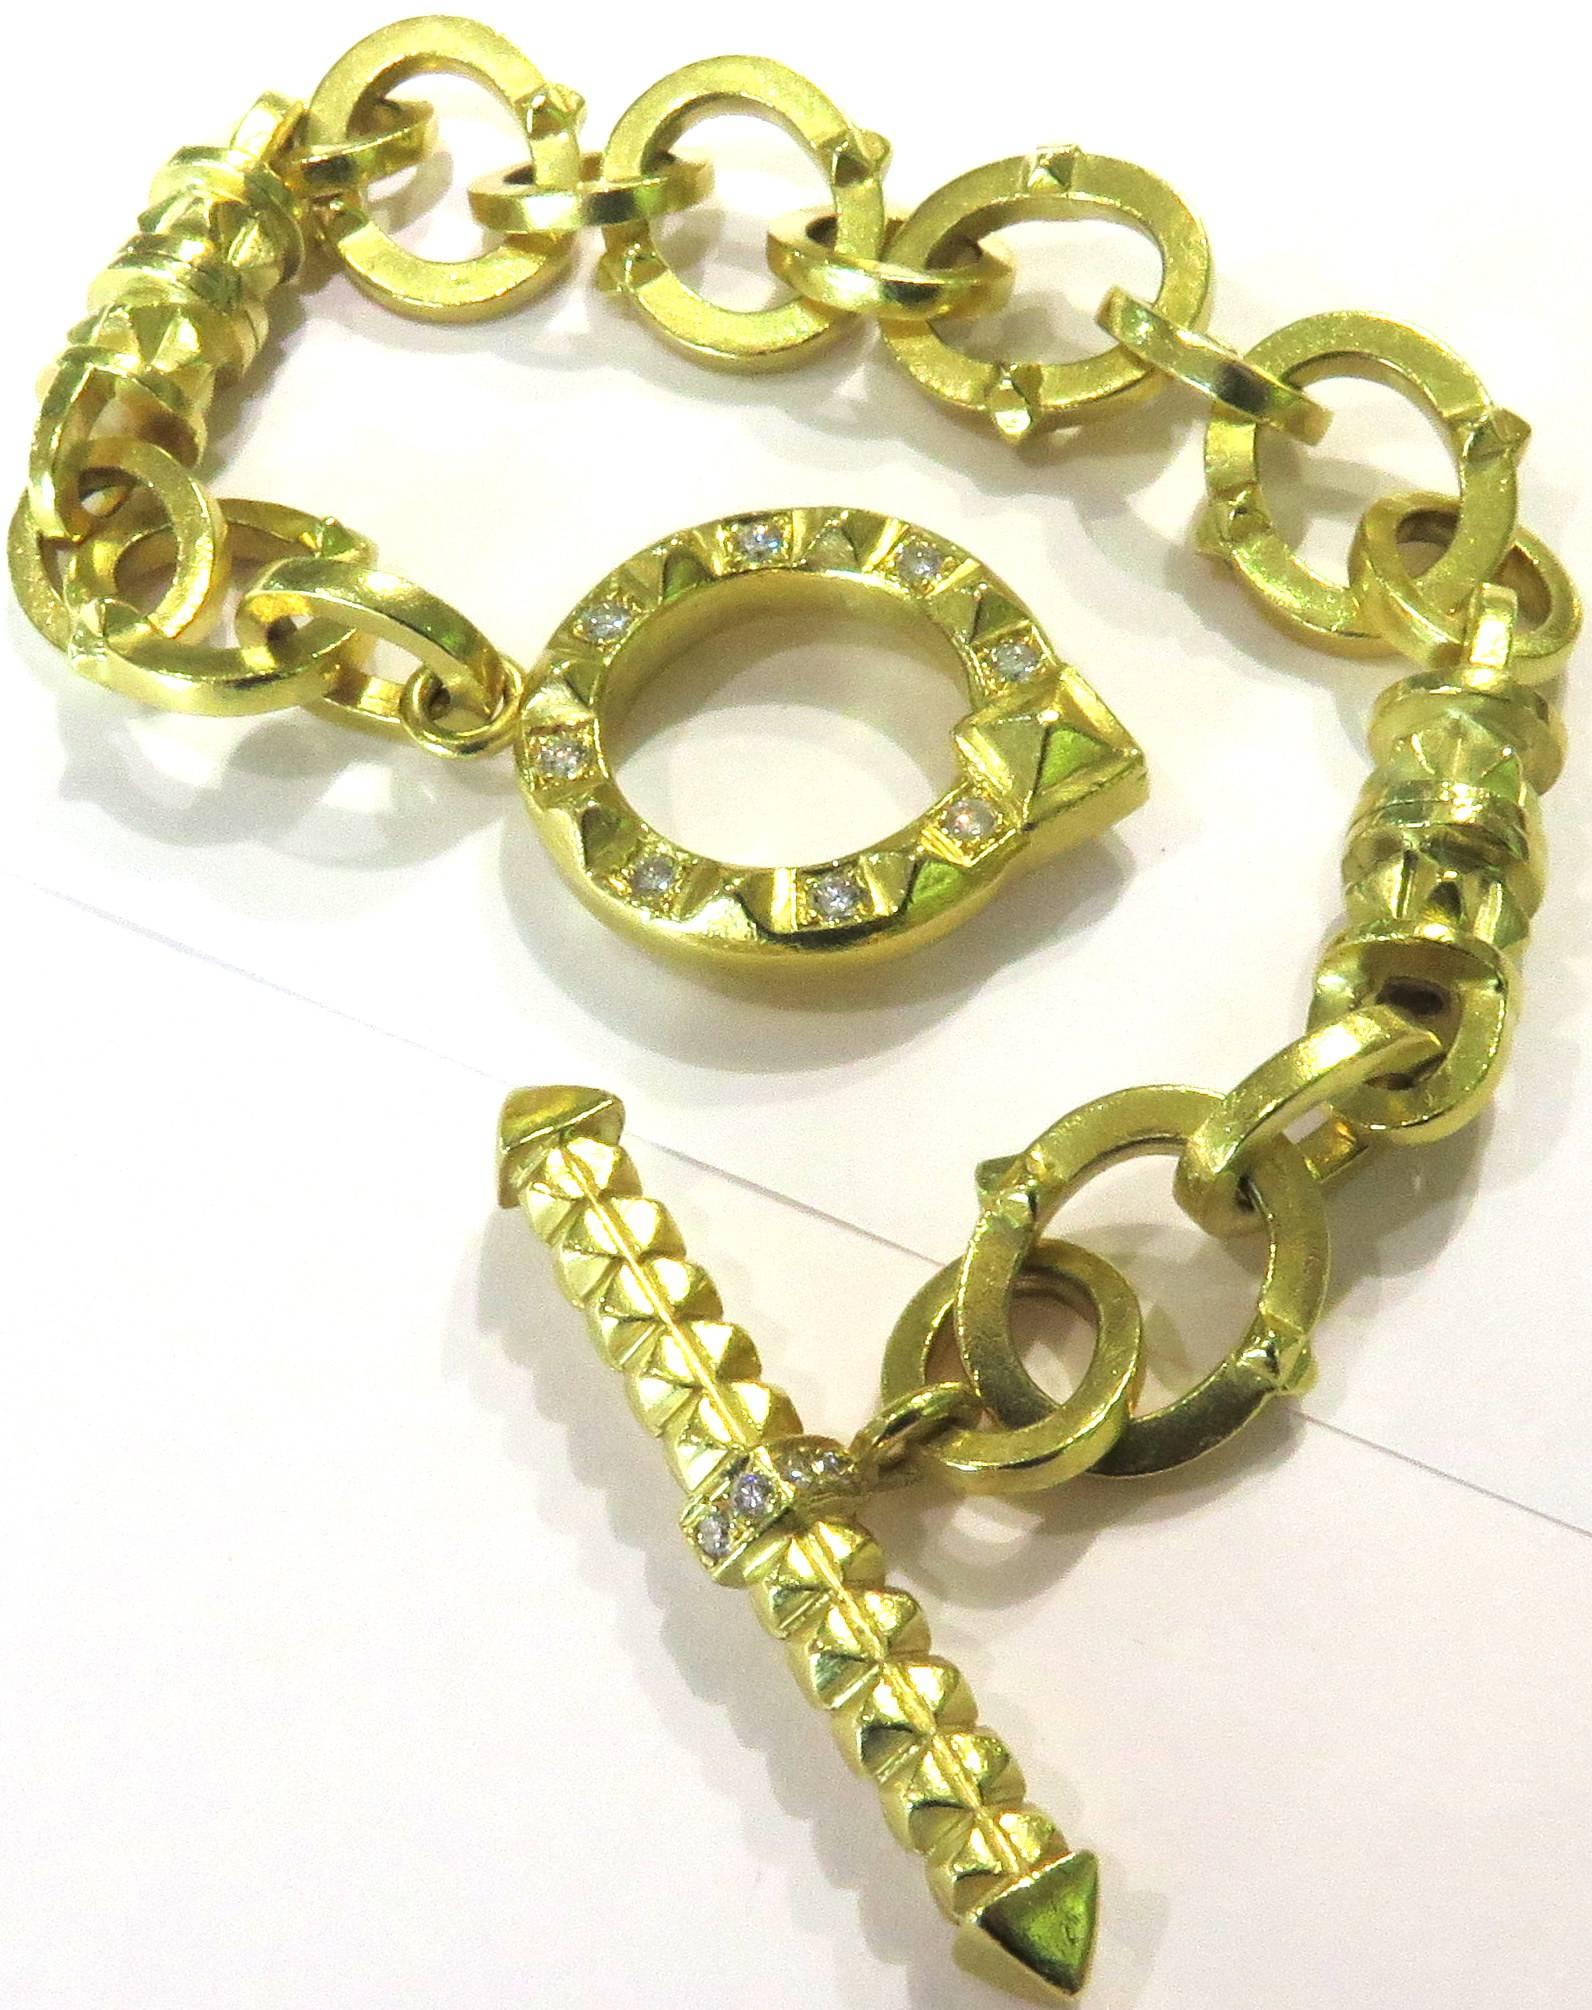 Exceptional Heavy Diamond Gold Solid Links Toggle Bracelet 5